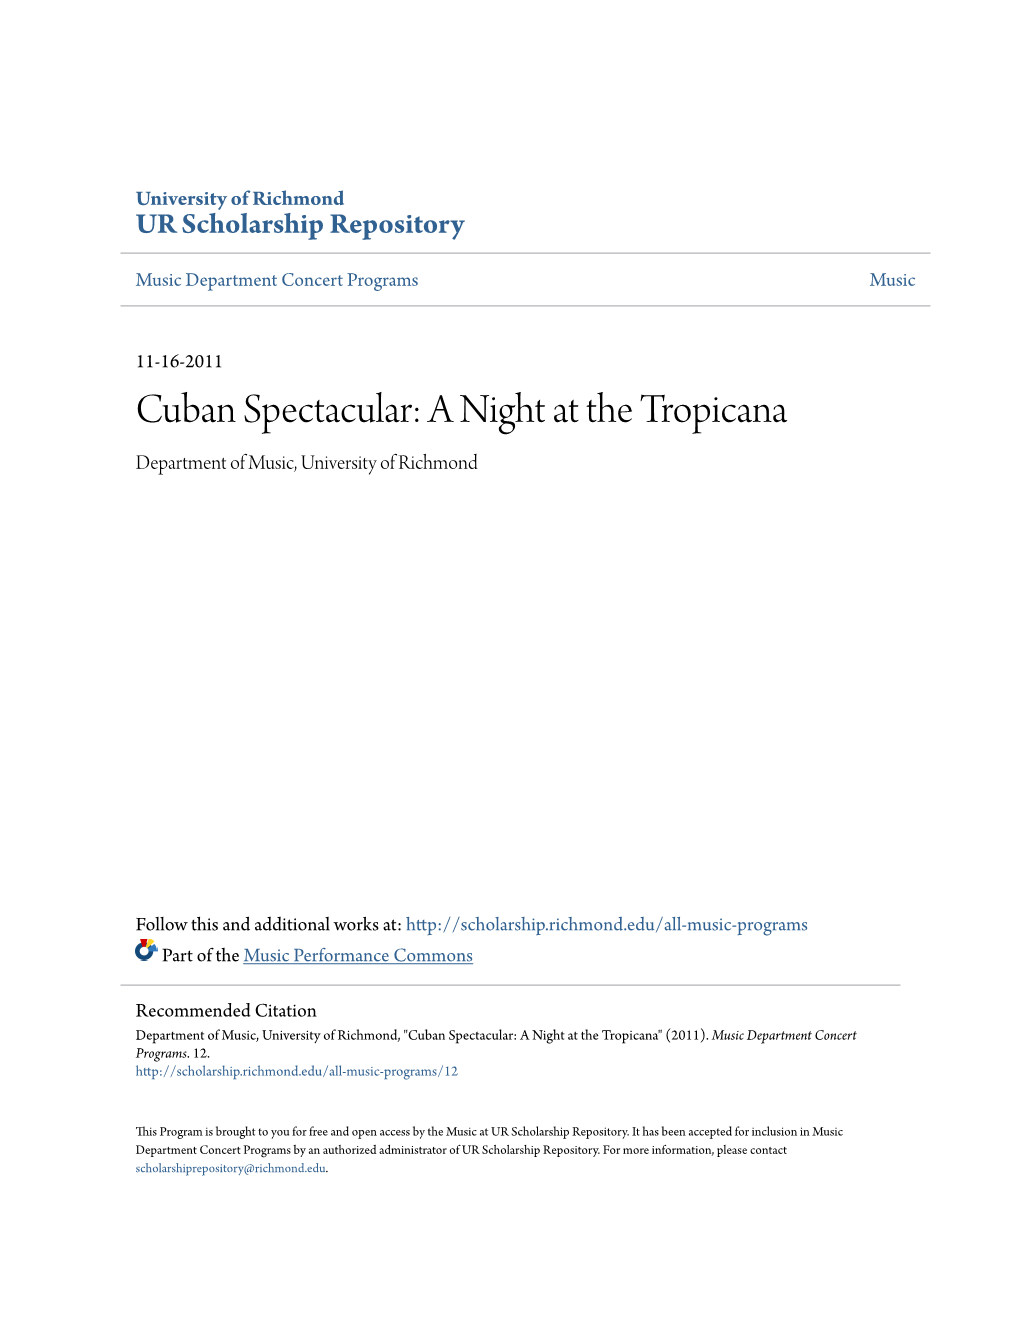 Cuban Spectacular: a Night at the Tropicana Department of Music, University of Richmond